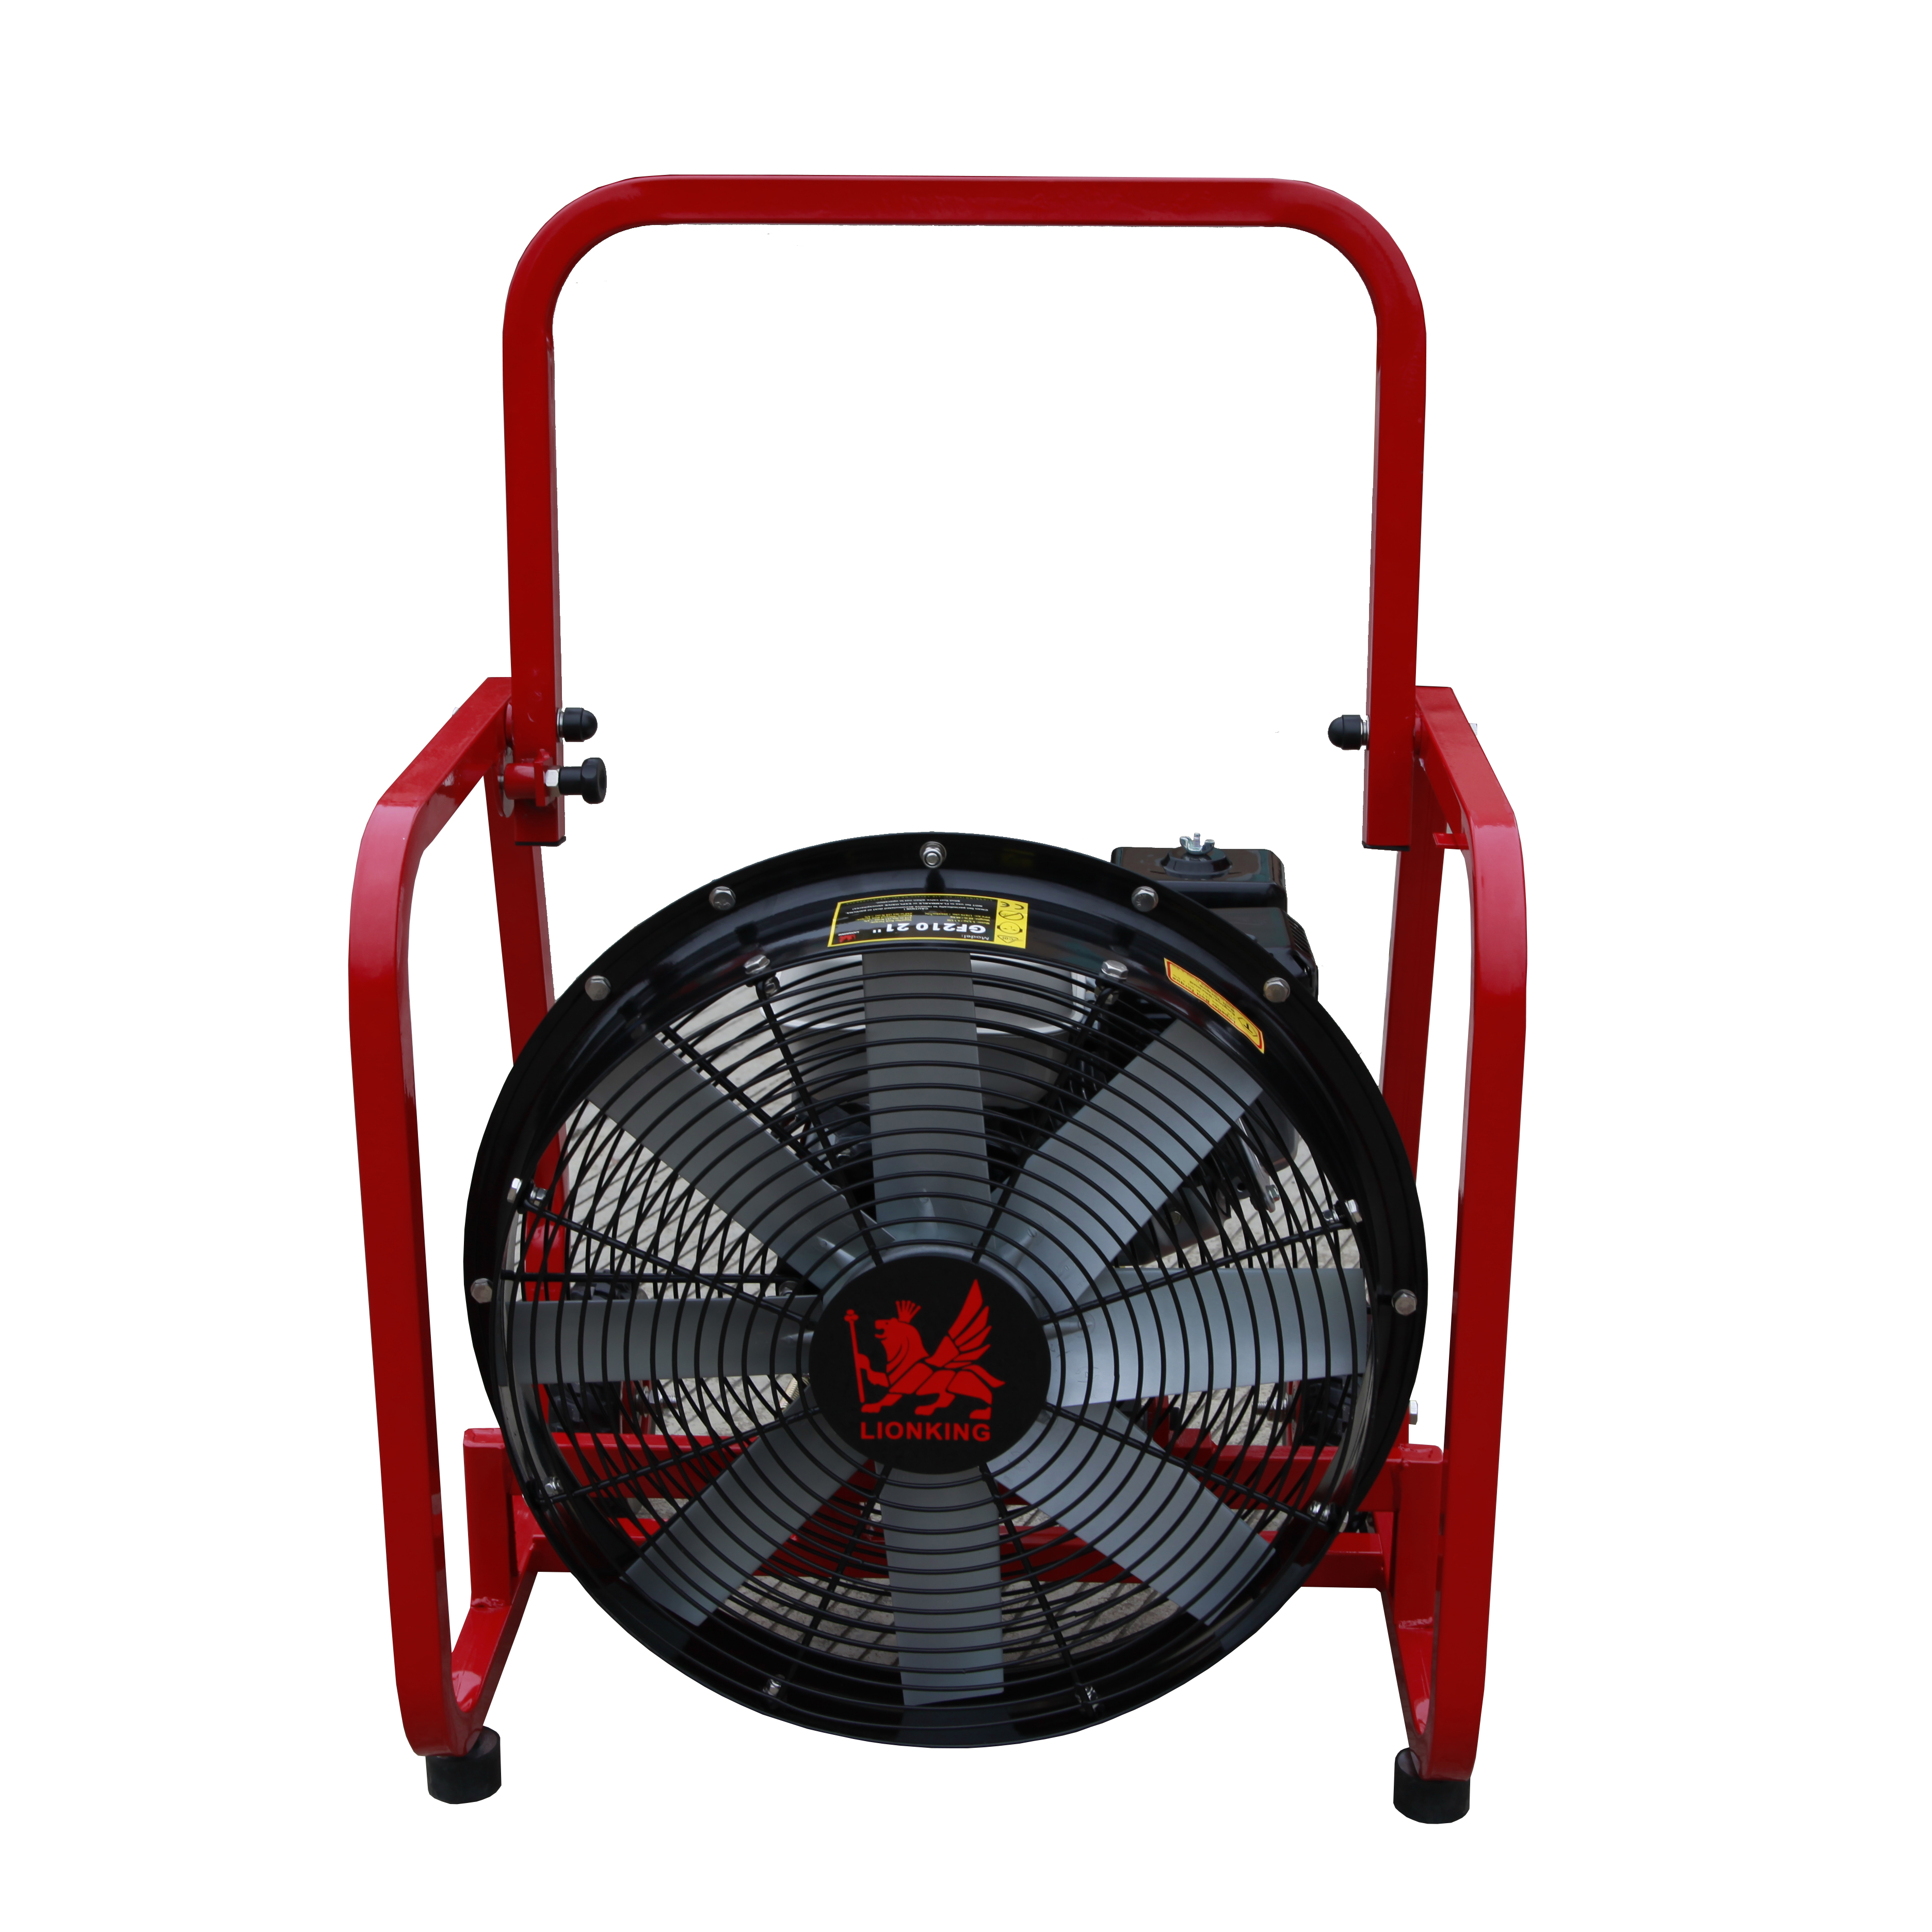 Ordinary Discount High Temperature Axial Fan - GF240-24" PPV axial fan ventilation blower smoke ejector Gasoline turbo blower 5.5HP positive pressure – Lion King